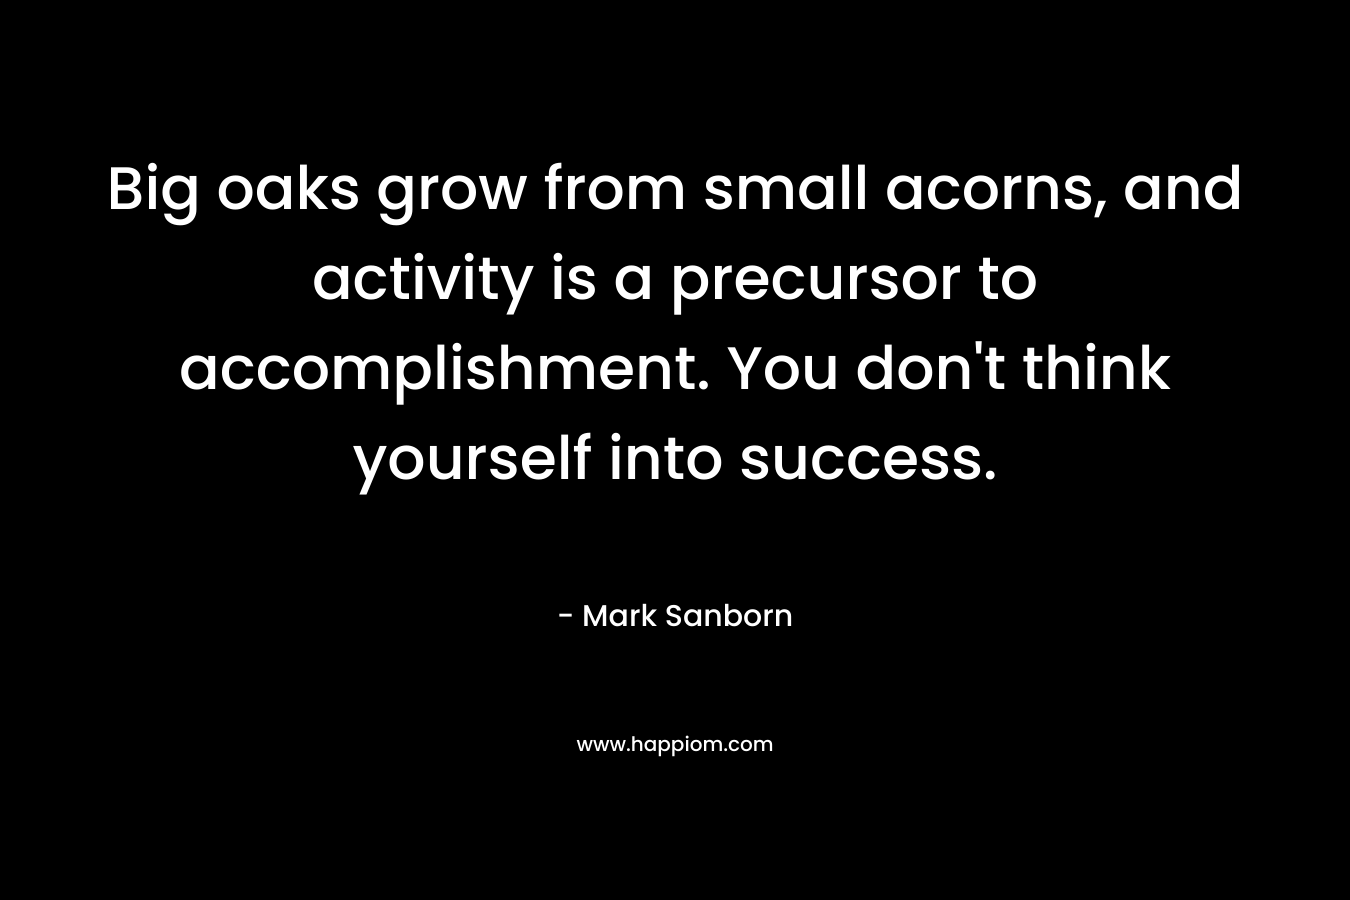 Big oaks grow from small acorns, and activity is a precursor to accomplishment. You don’t think yourself into success. – Mark Sanborn